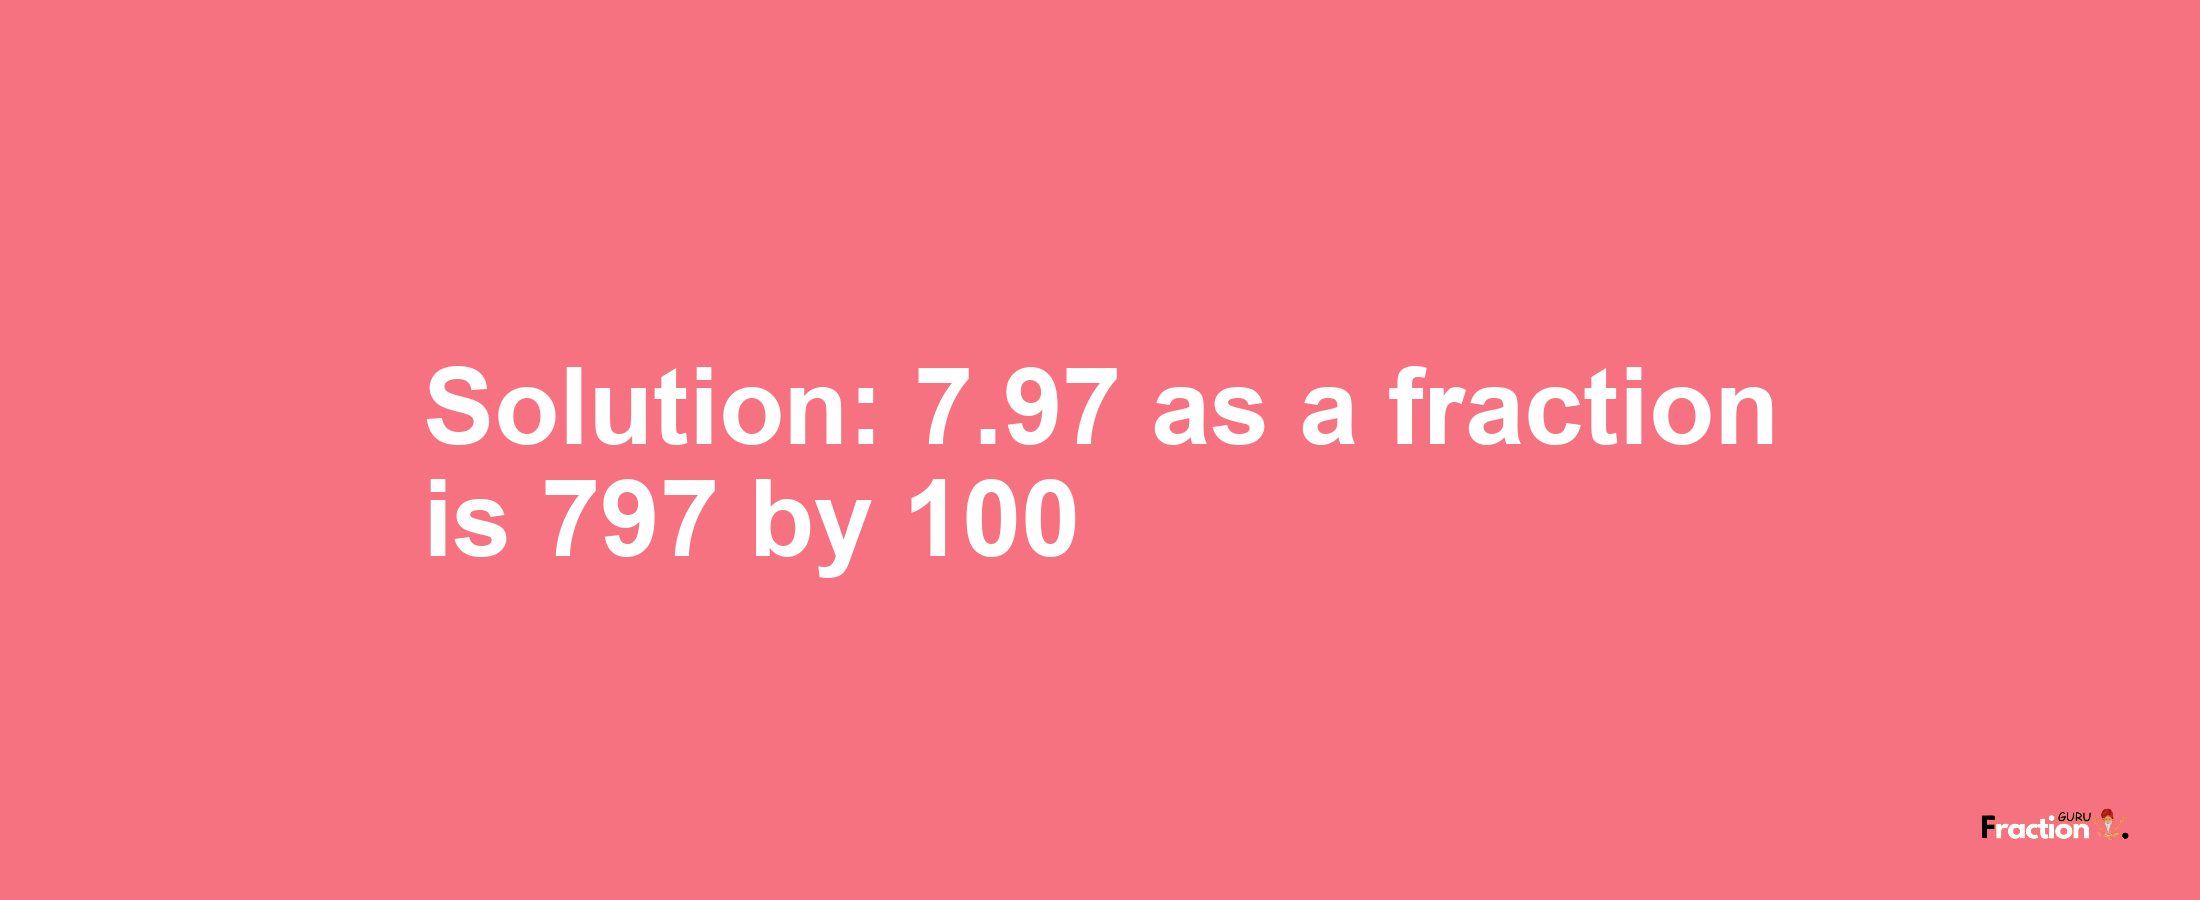 Solution:7.97 as a fraction is 797/100